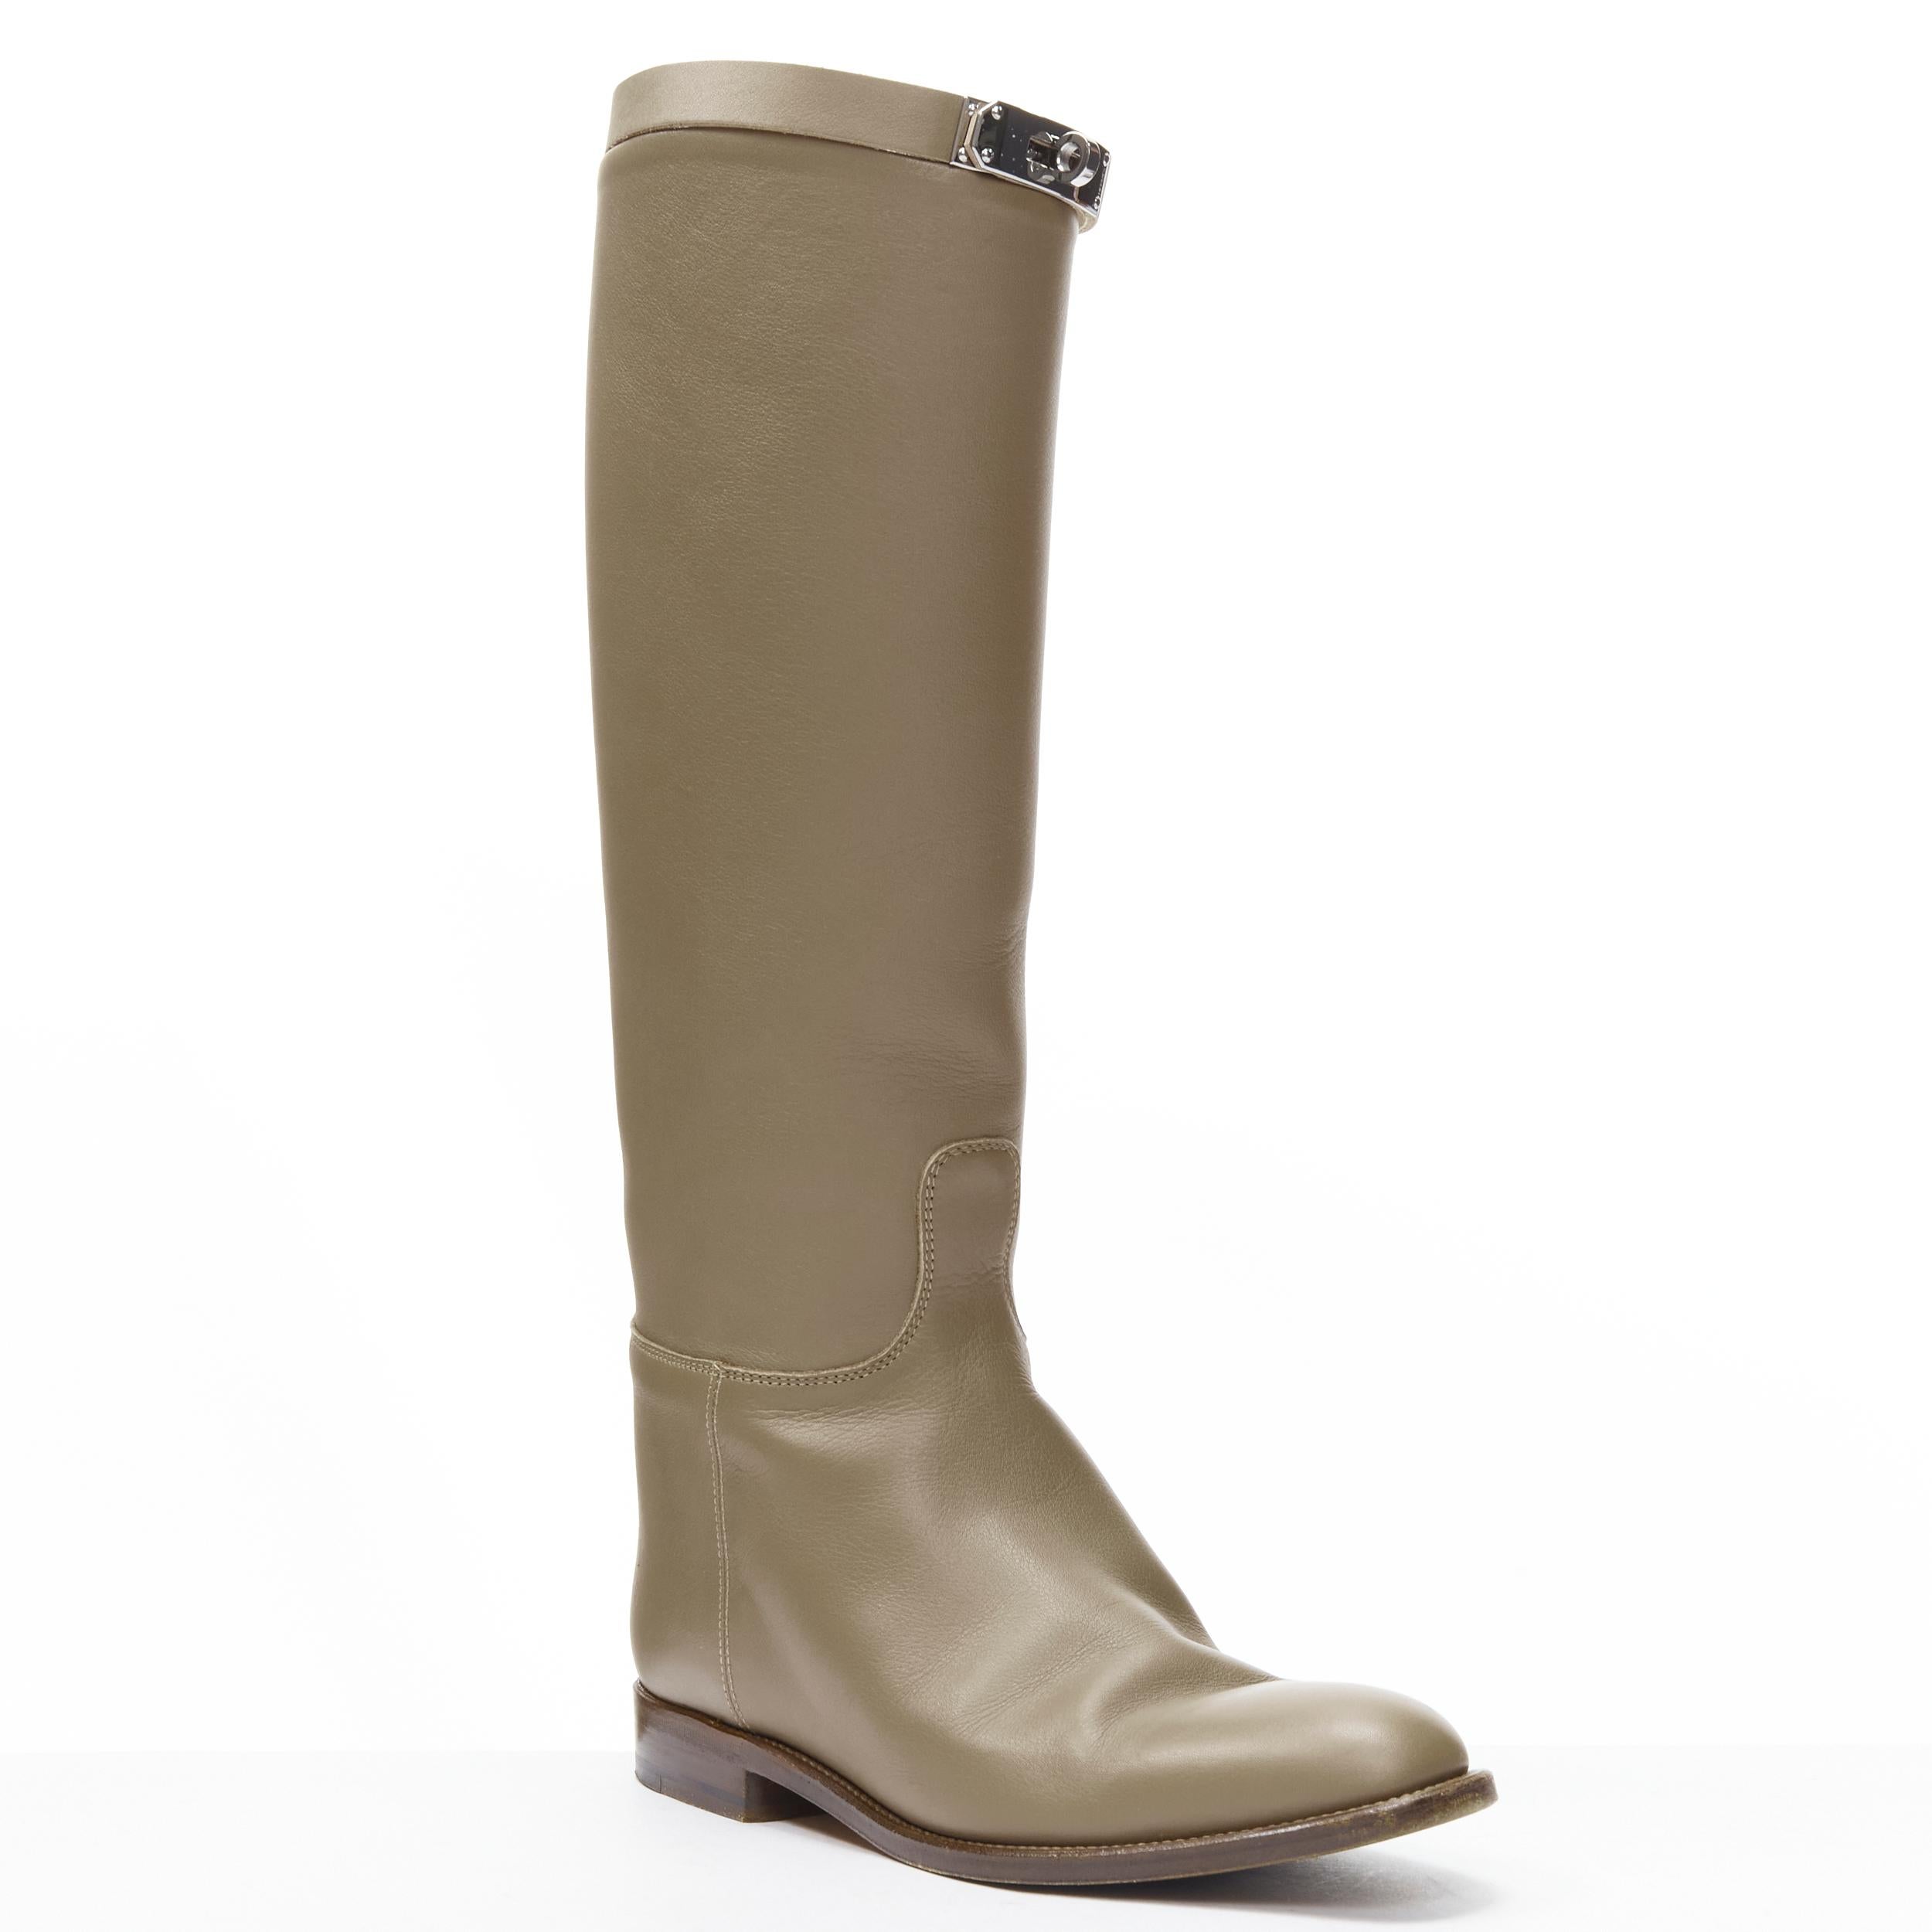 HERMES Kelly Jumping taupe brown PHW buckle riding boot EU37.5
Reference: MELK/A00229
Brand: Hermes 
Material: Leather 
Color: White 
Pattern: Solid 
Closure: Turnlock 
Extra Detail: Pull on boots. PHW Kelly turnlock strap. Concealed heel. Stacked